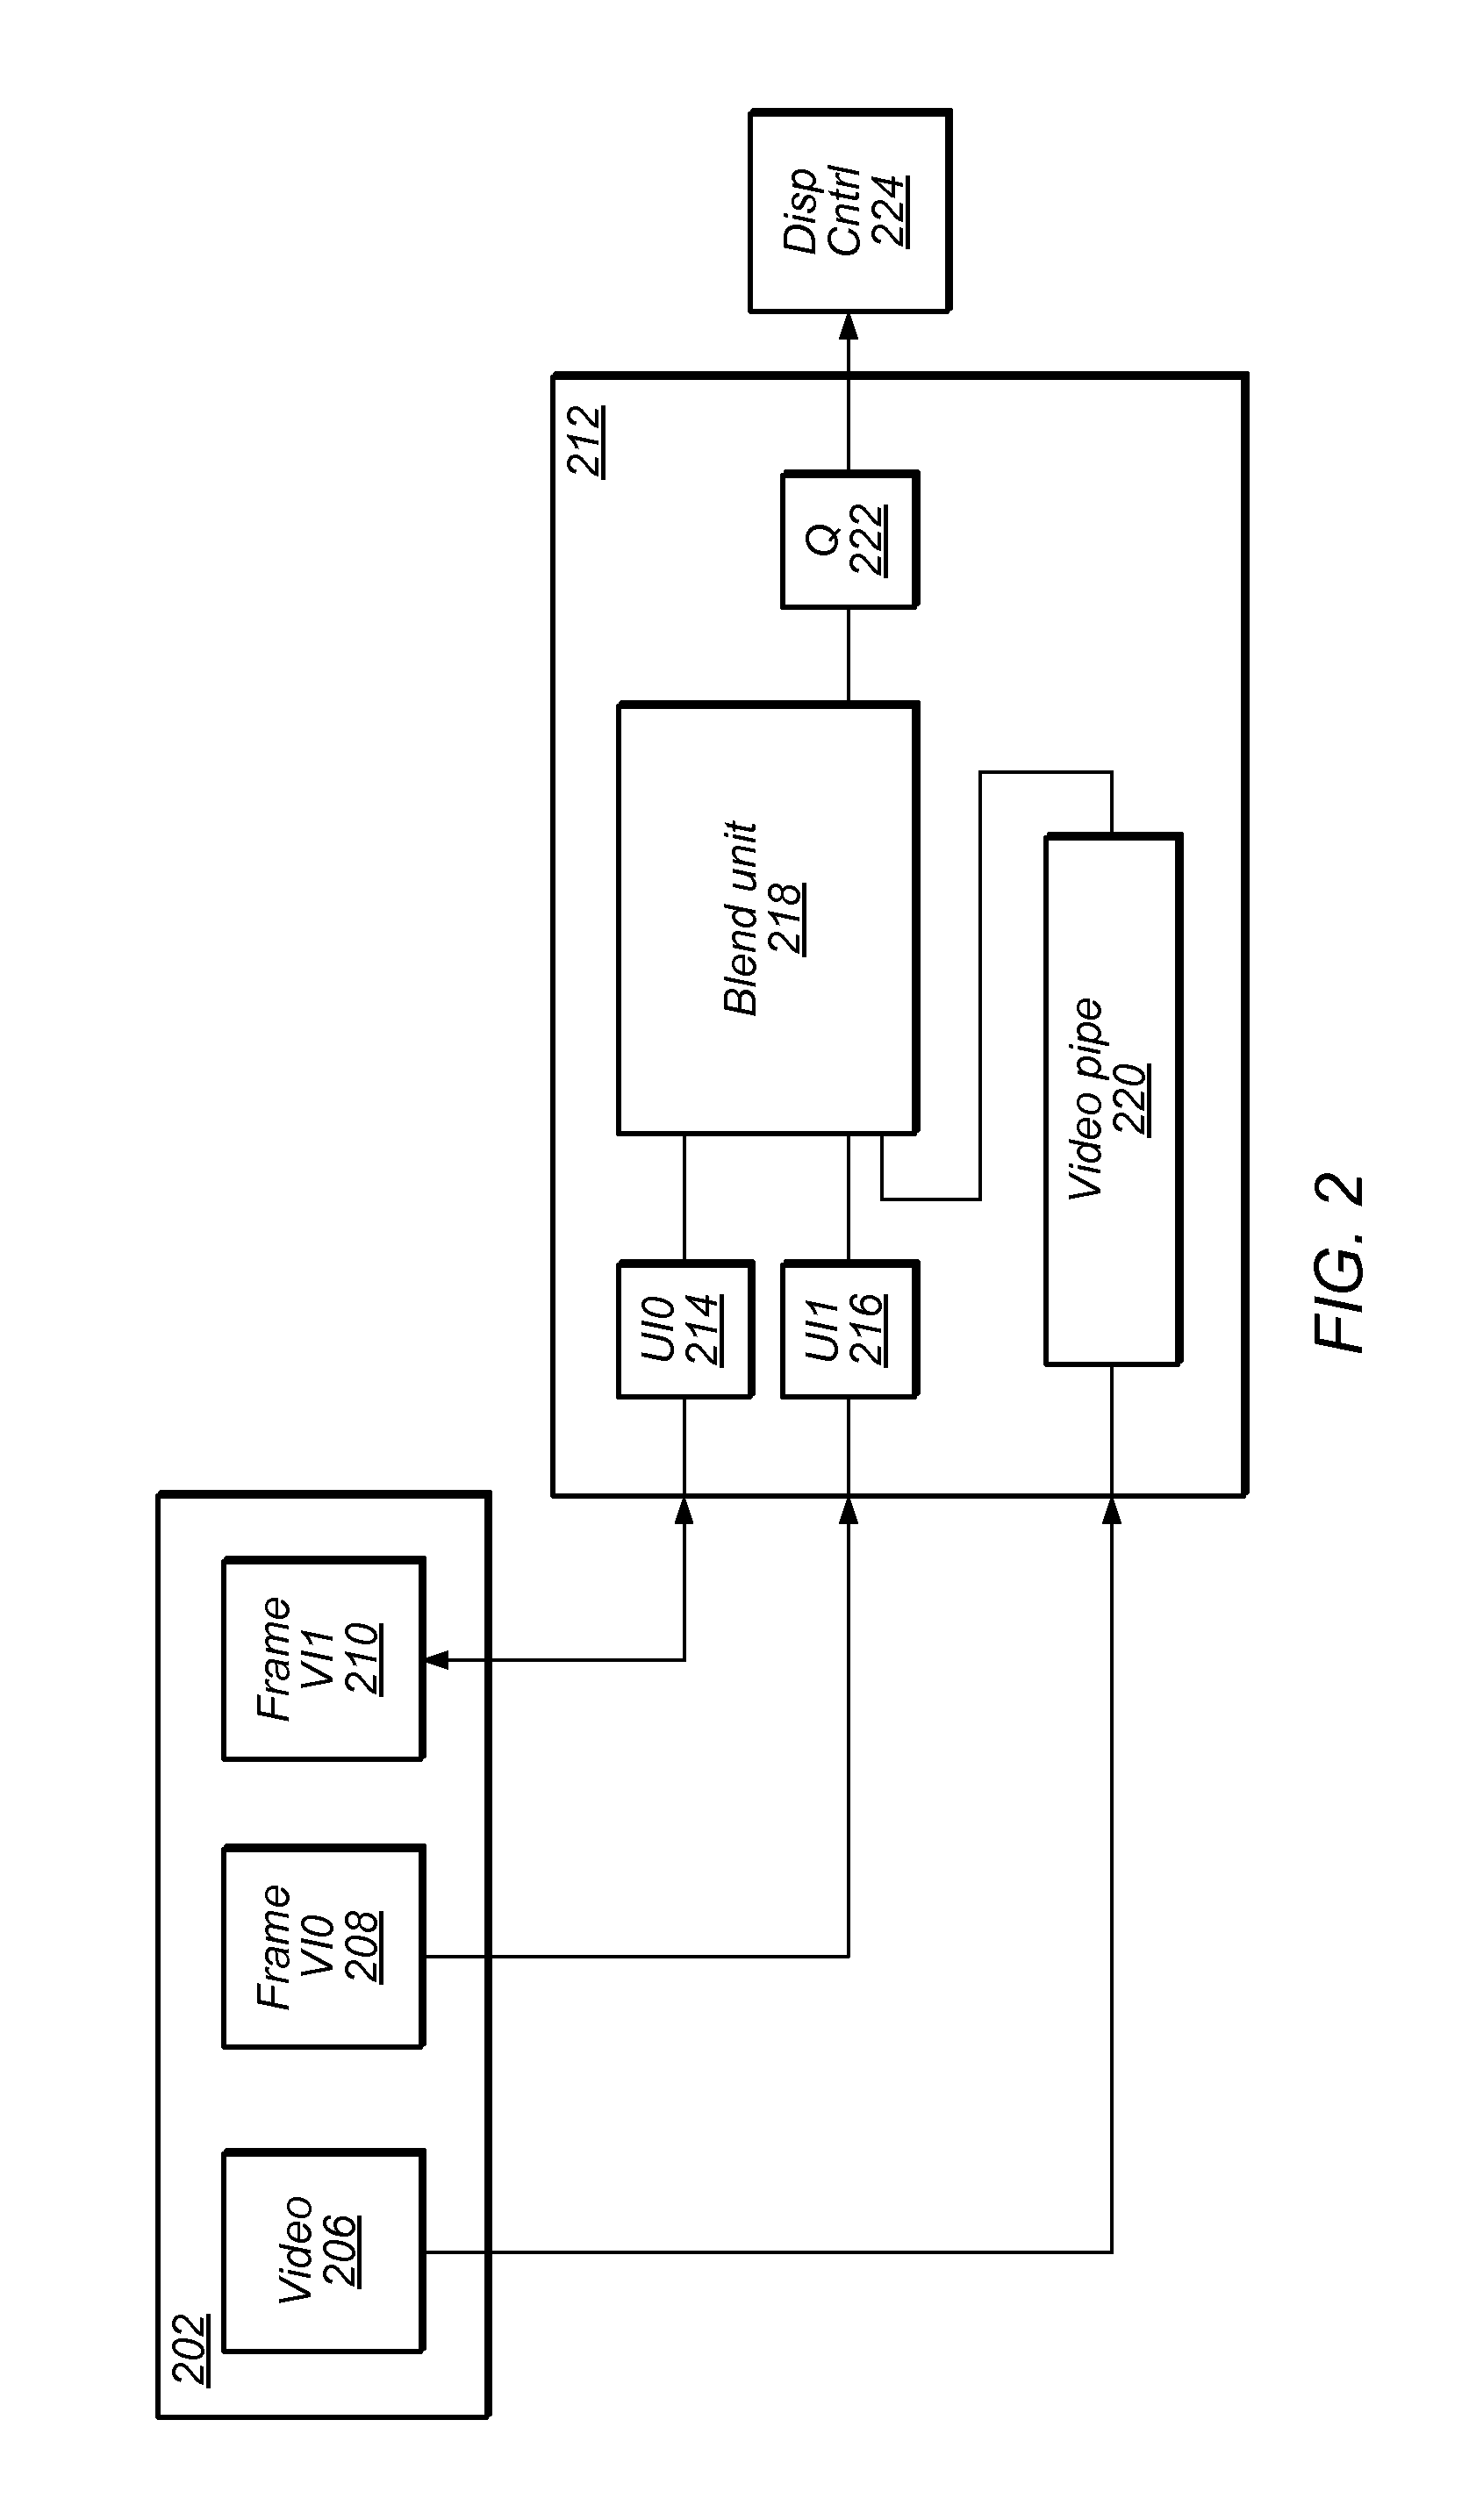 User interface unit for fetching only active regions of a frame